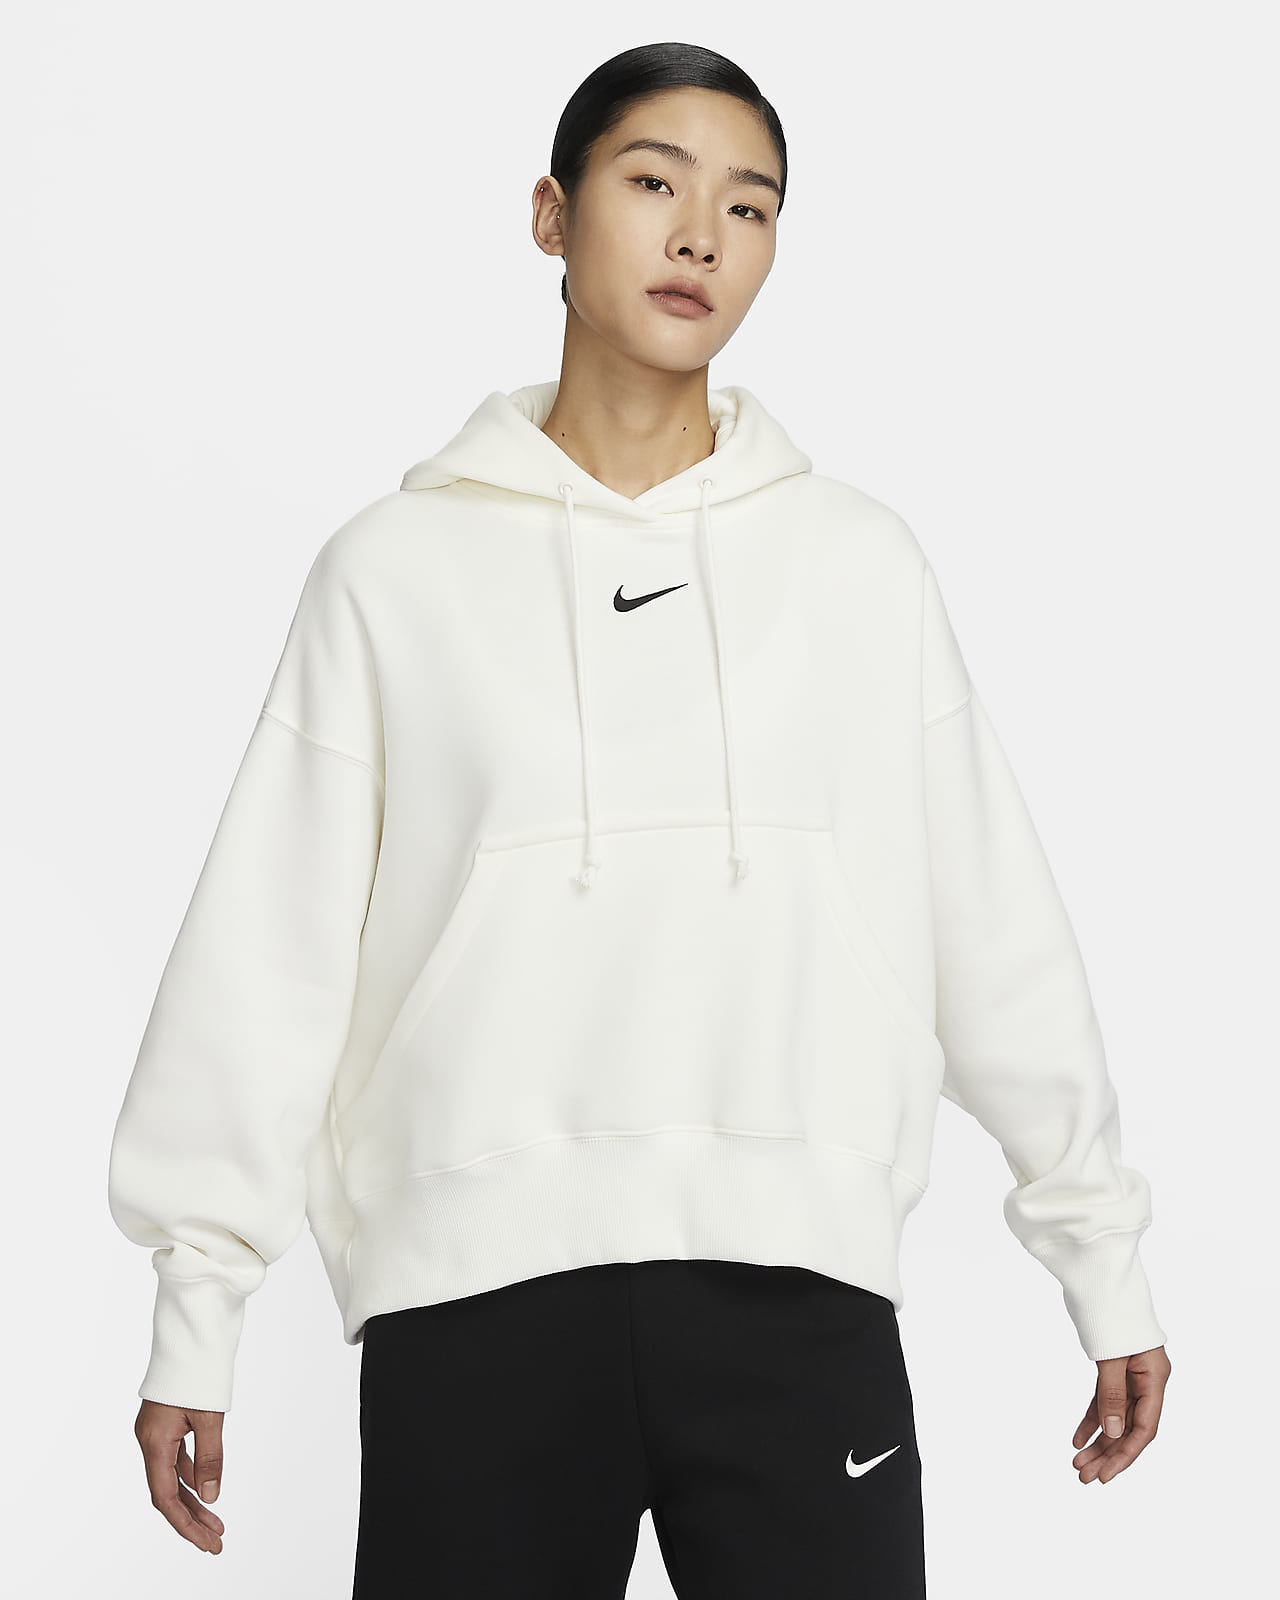 NIKE LAB PULL OVER  PARKER US M size 新品